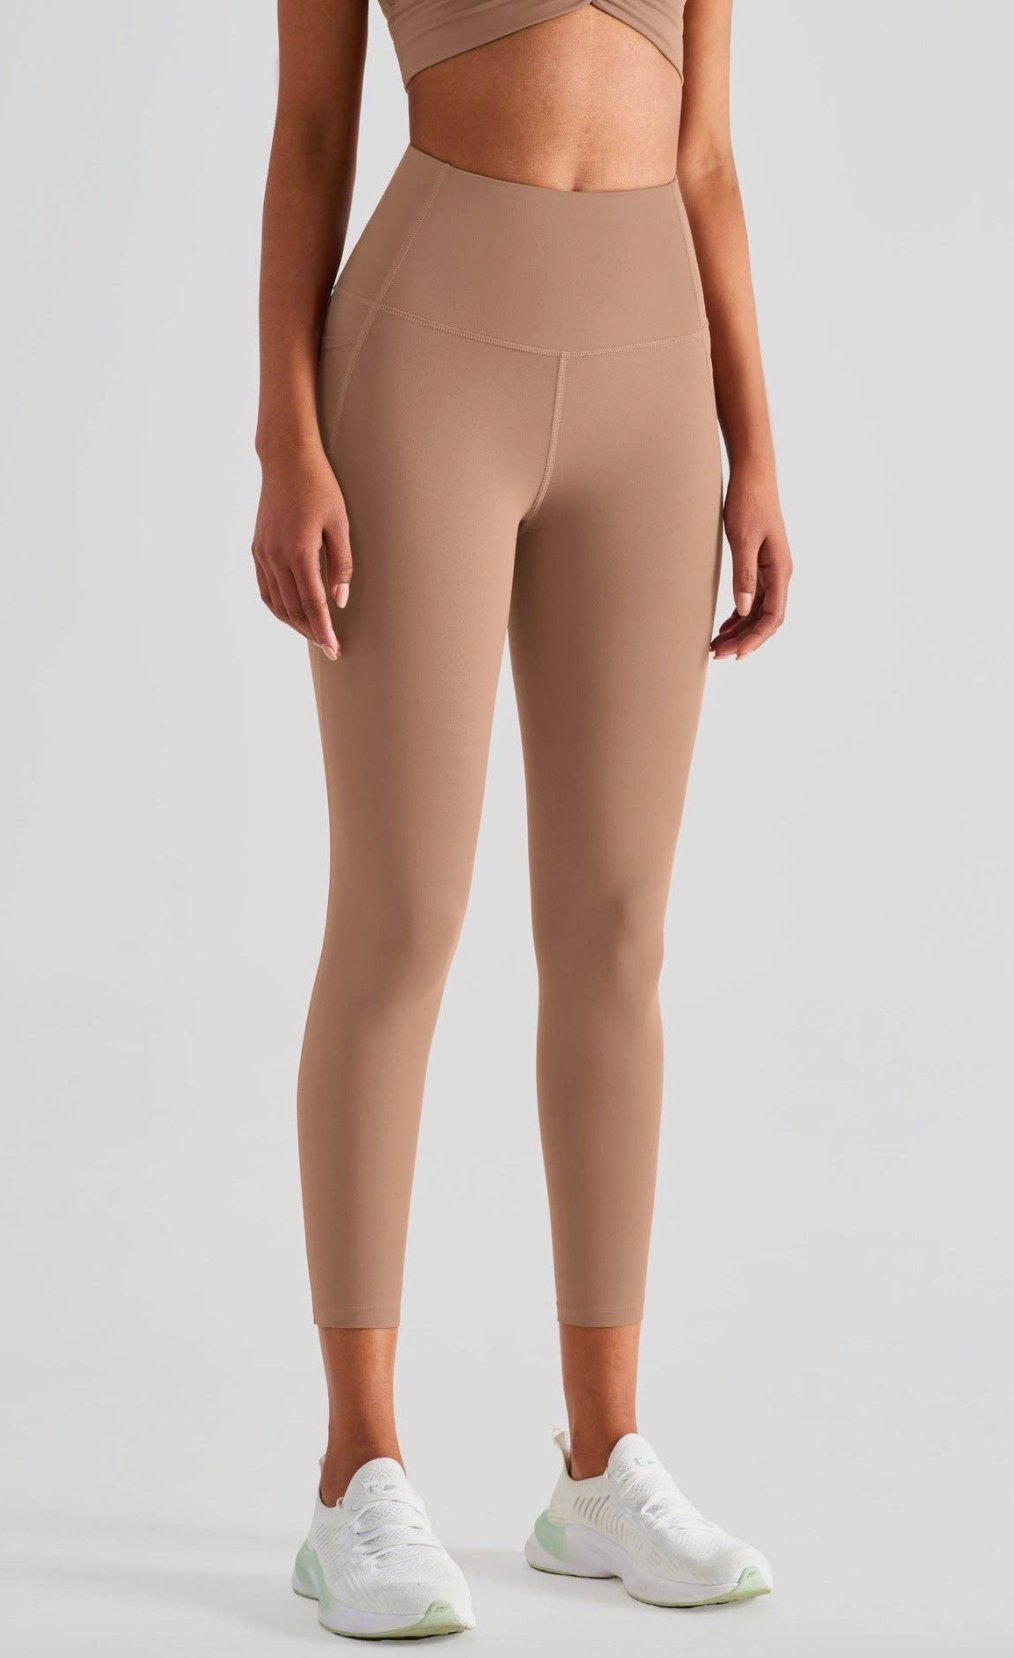 Soft Buttery High Waisted Leggings with Pockets